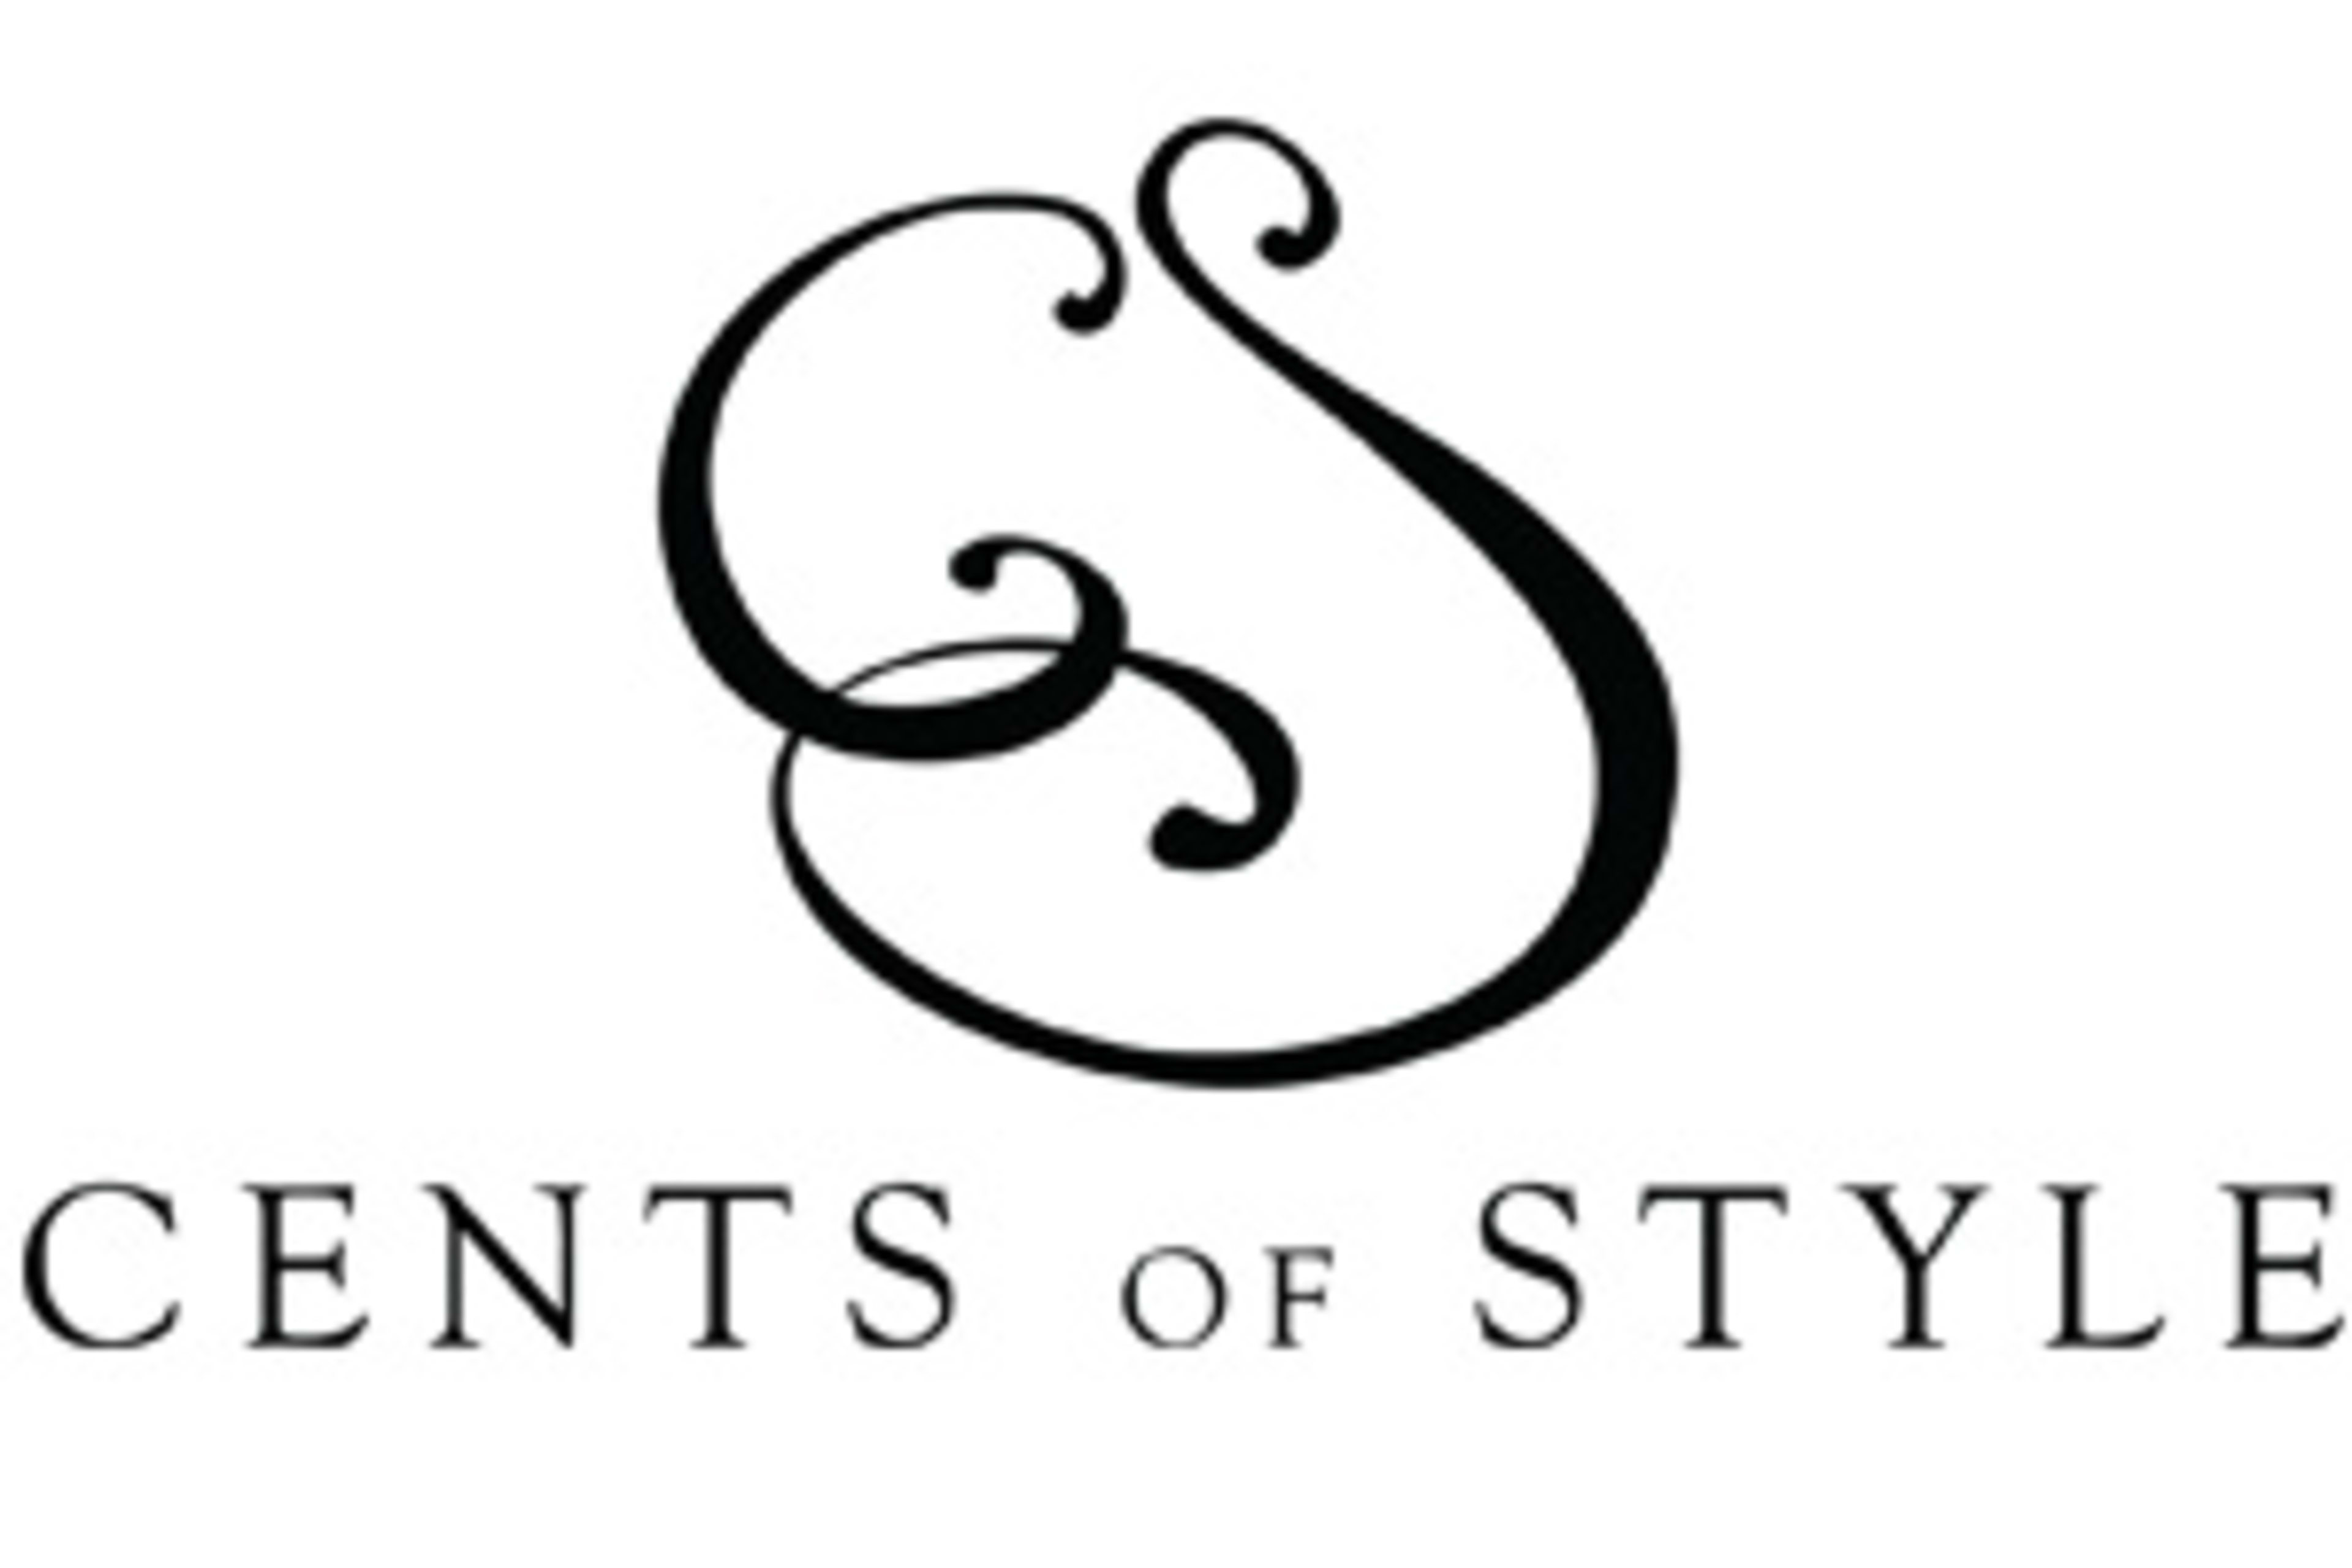 Cents of StyleCode